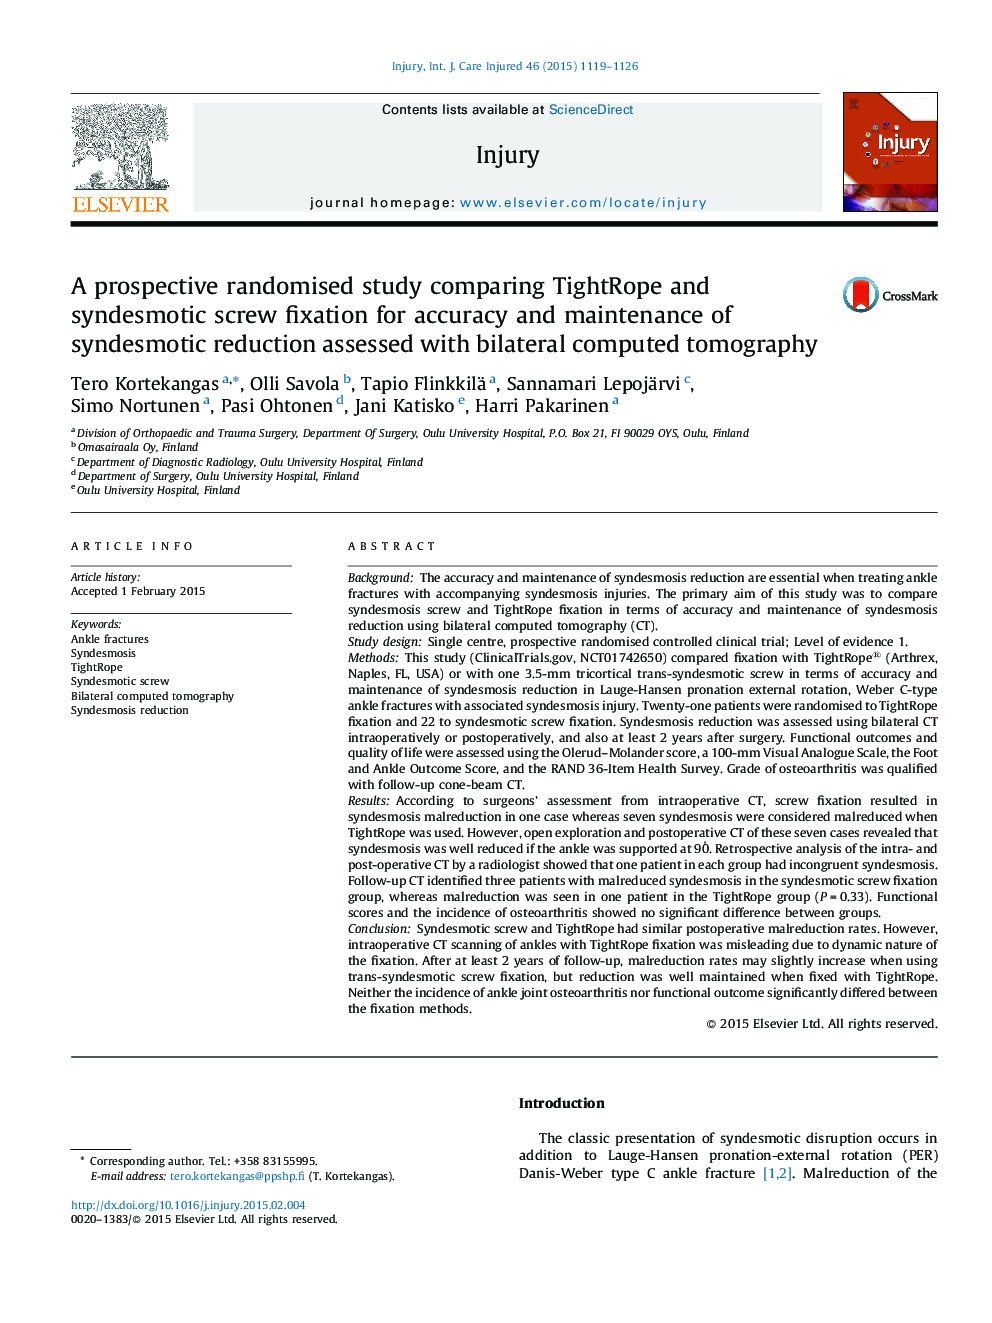 A prospective randomised study comparing TightRope and syndesmotic screw fixation for accuracy and maintenance of syndesmotic reduction assessed with bilateral computed tomography